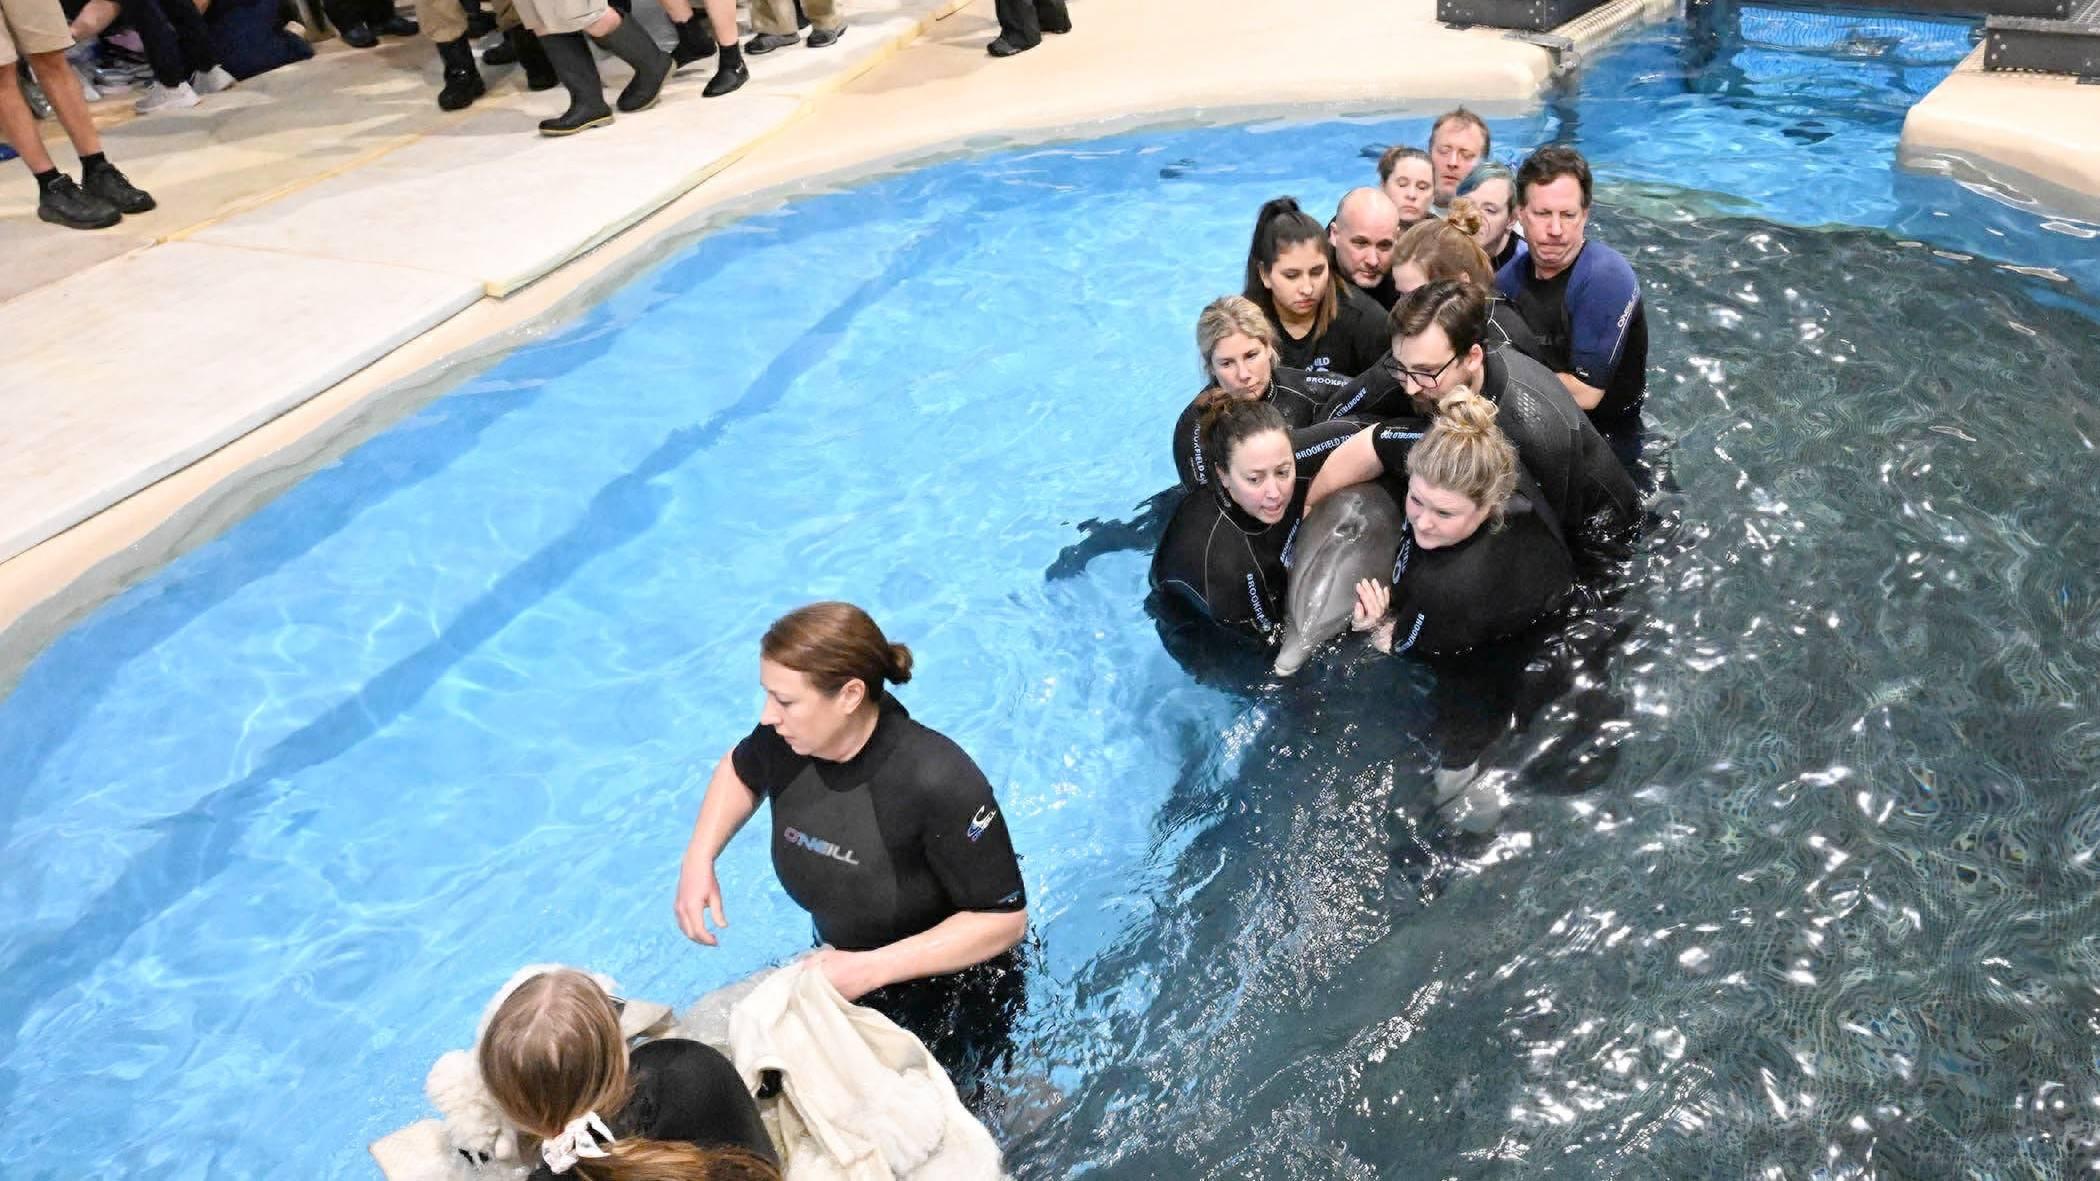 Brookfield Zoo’s animal care team introduces the zoo’s bottlenose dolphins to their renovated habitat. (Jim Schulz / CZS-Brookfield Zoo)